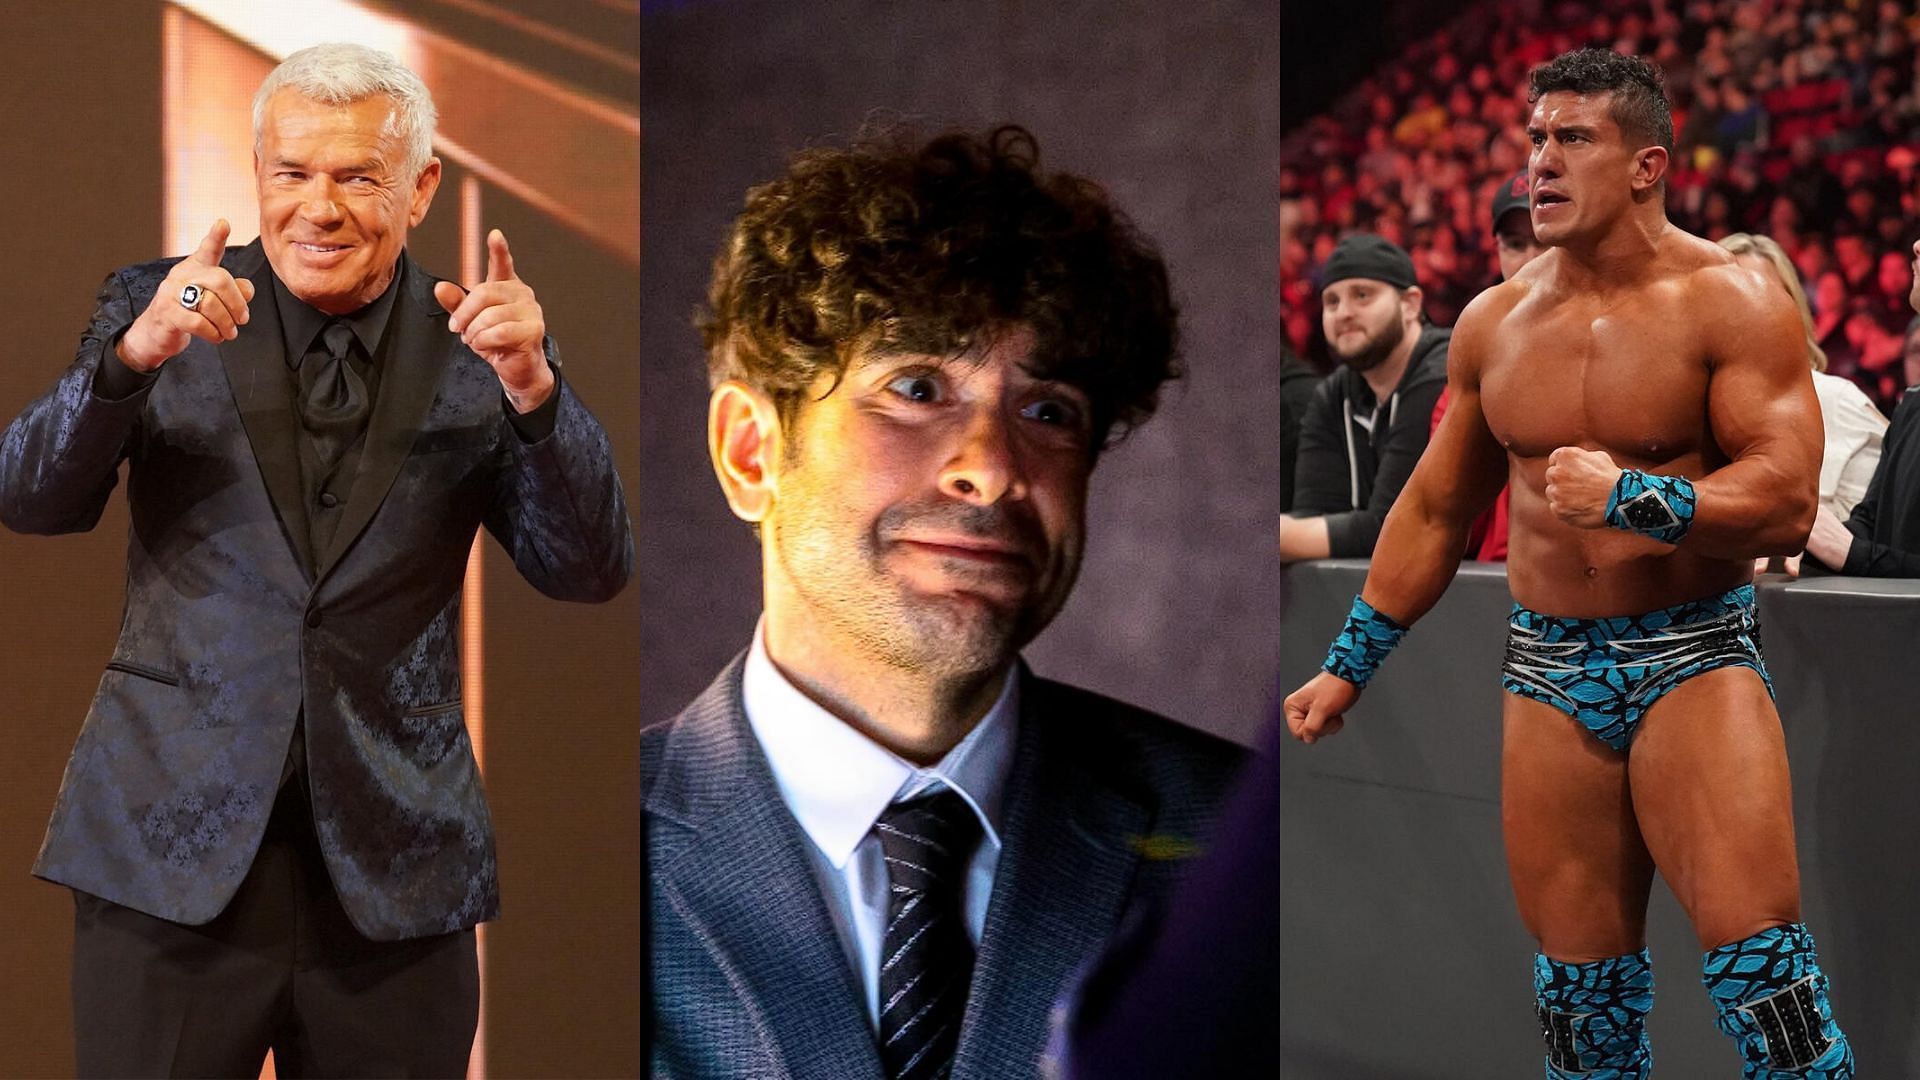 EC3 recently talked about the war of words between Tony Khan and Eric Bischoff [Photo courtesy of WWE